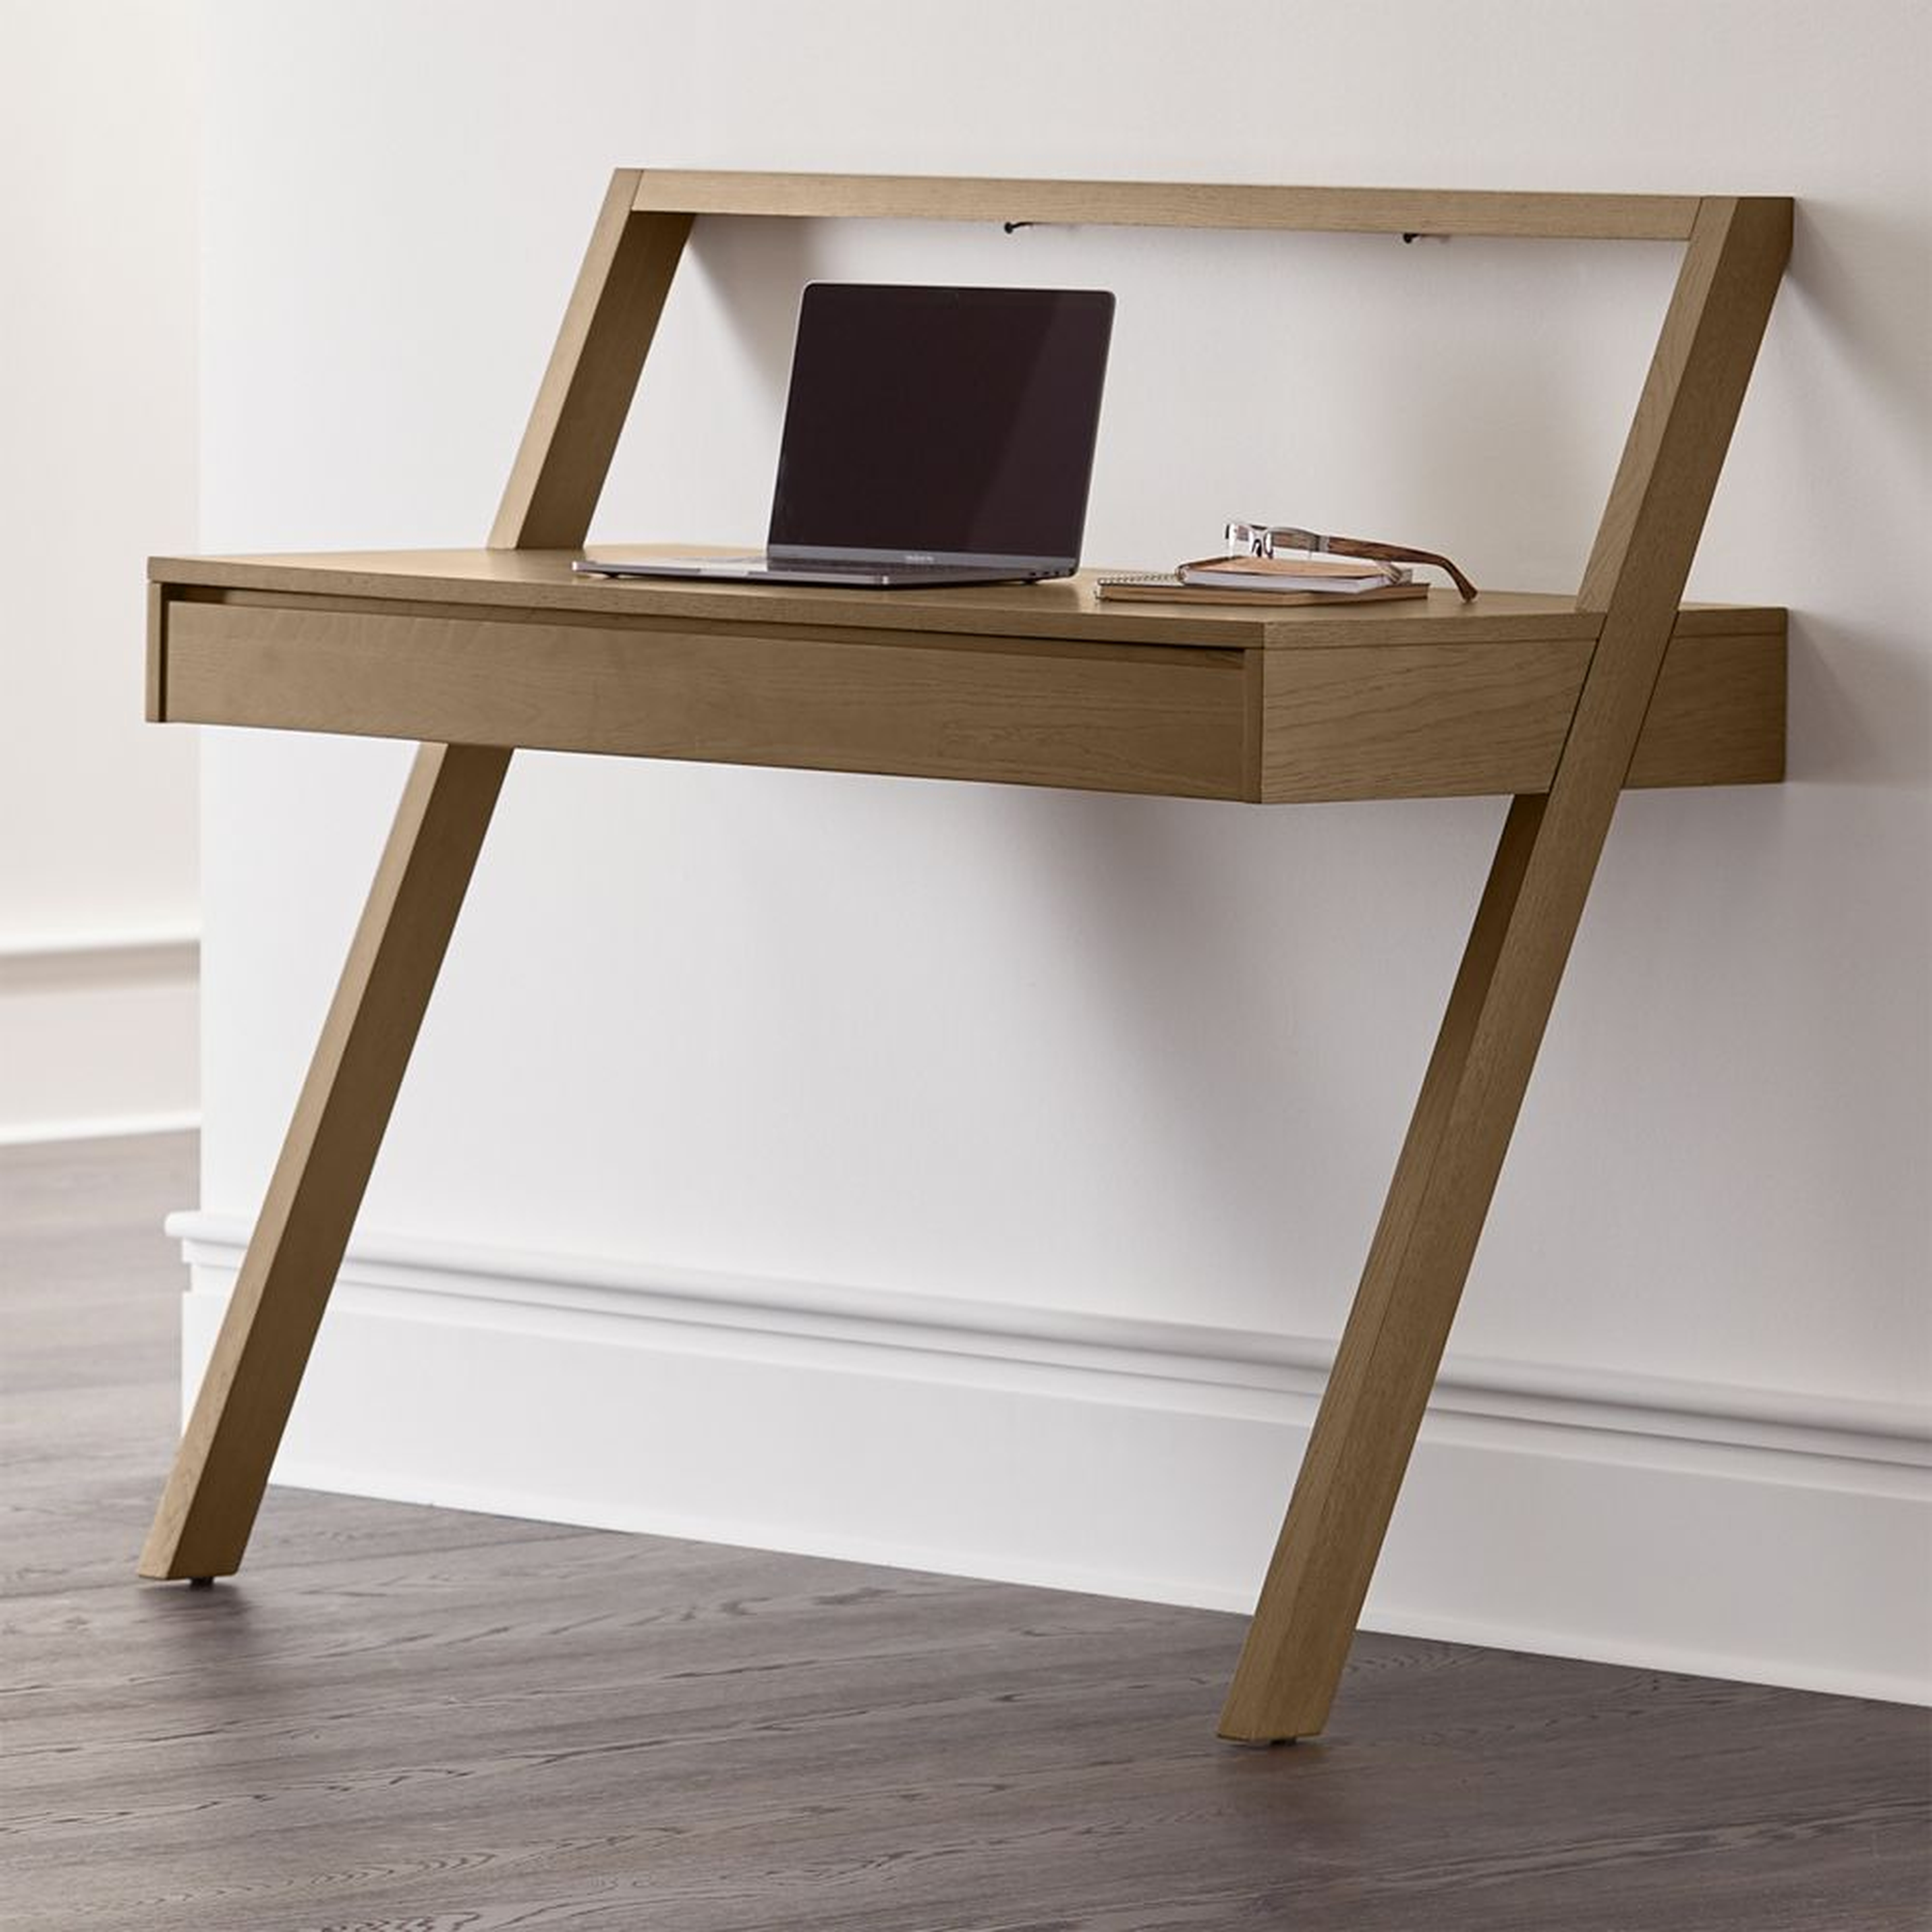 Batten Wall-Mounted Desk - Crate and Barrel